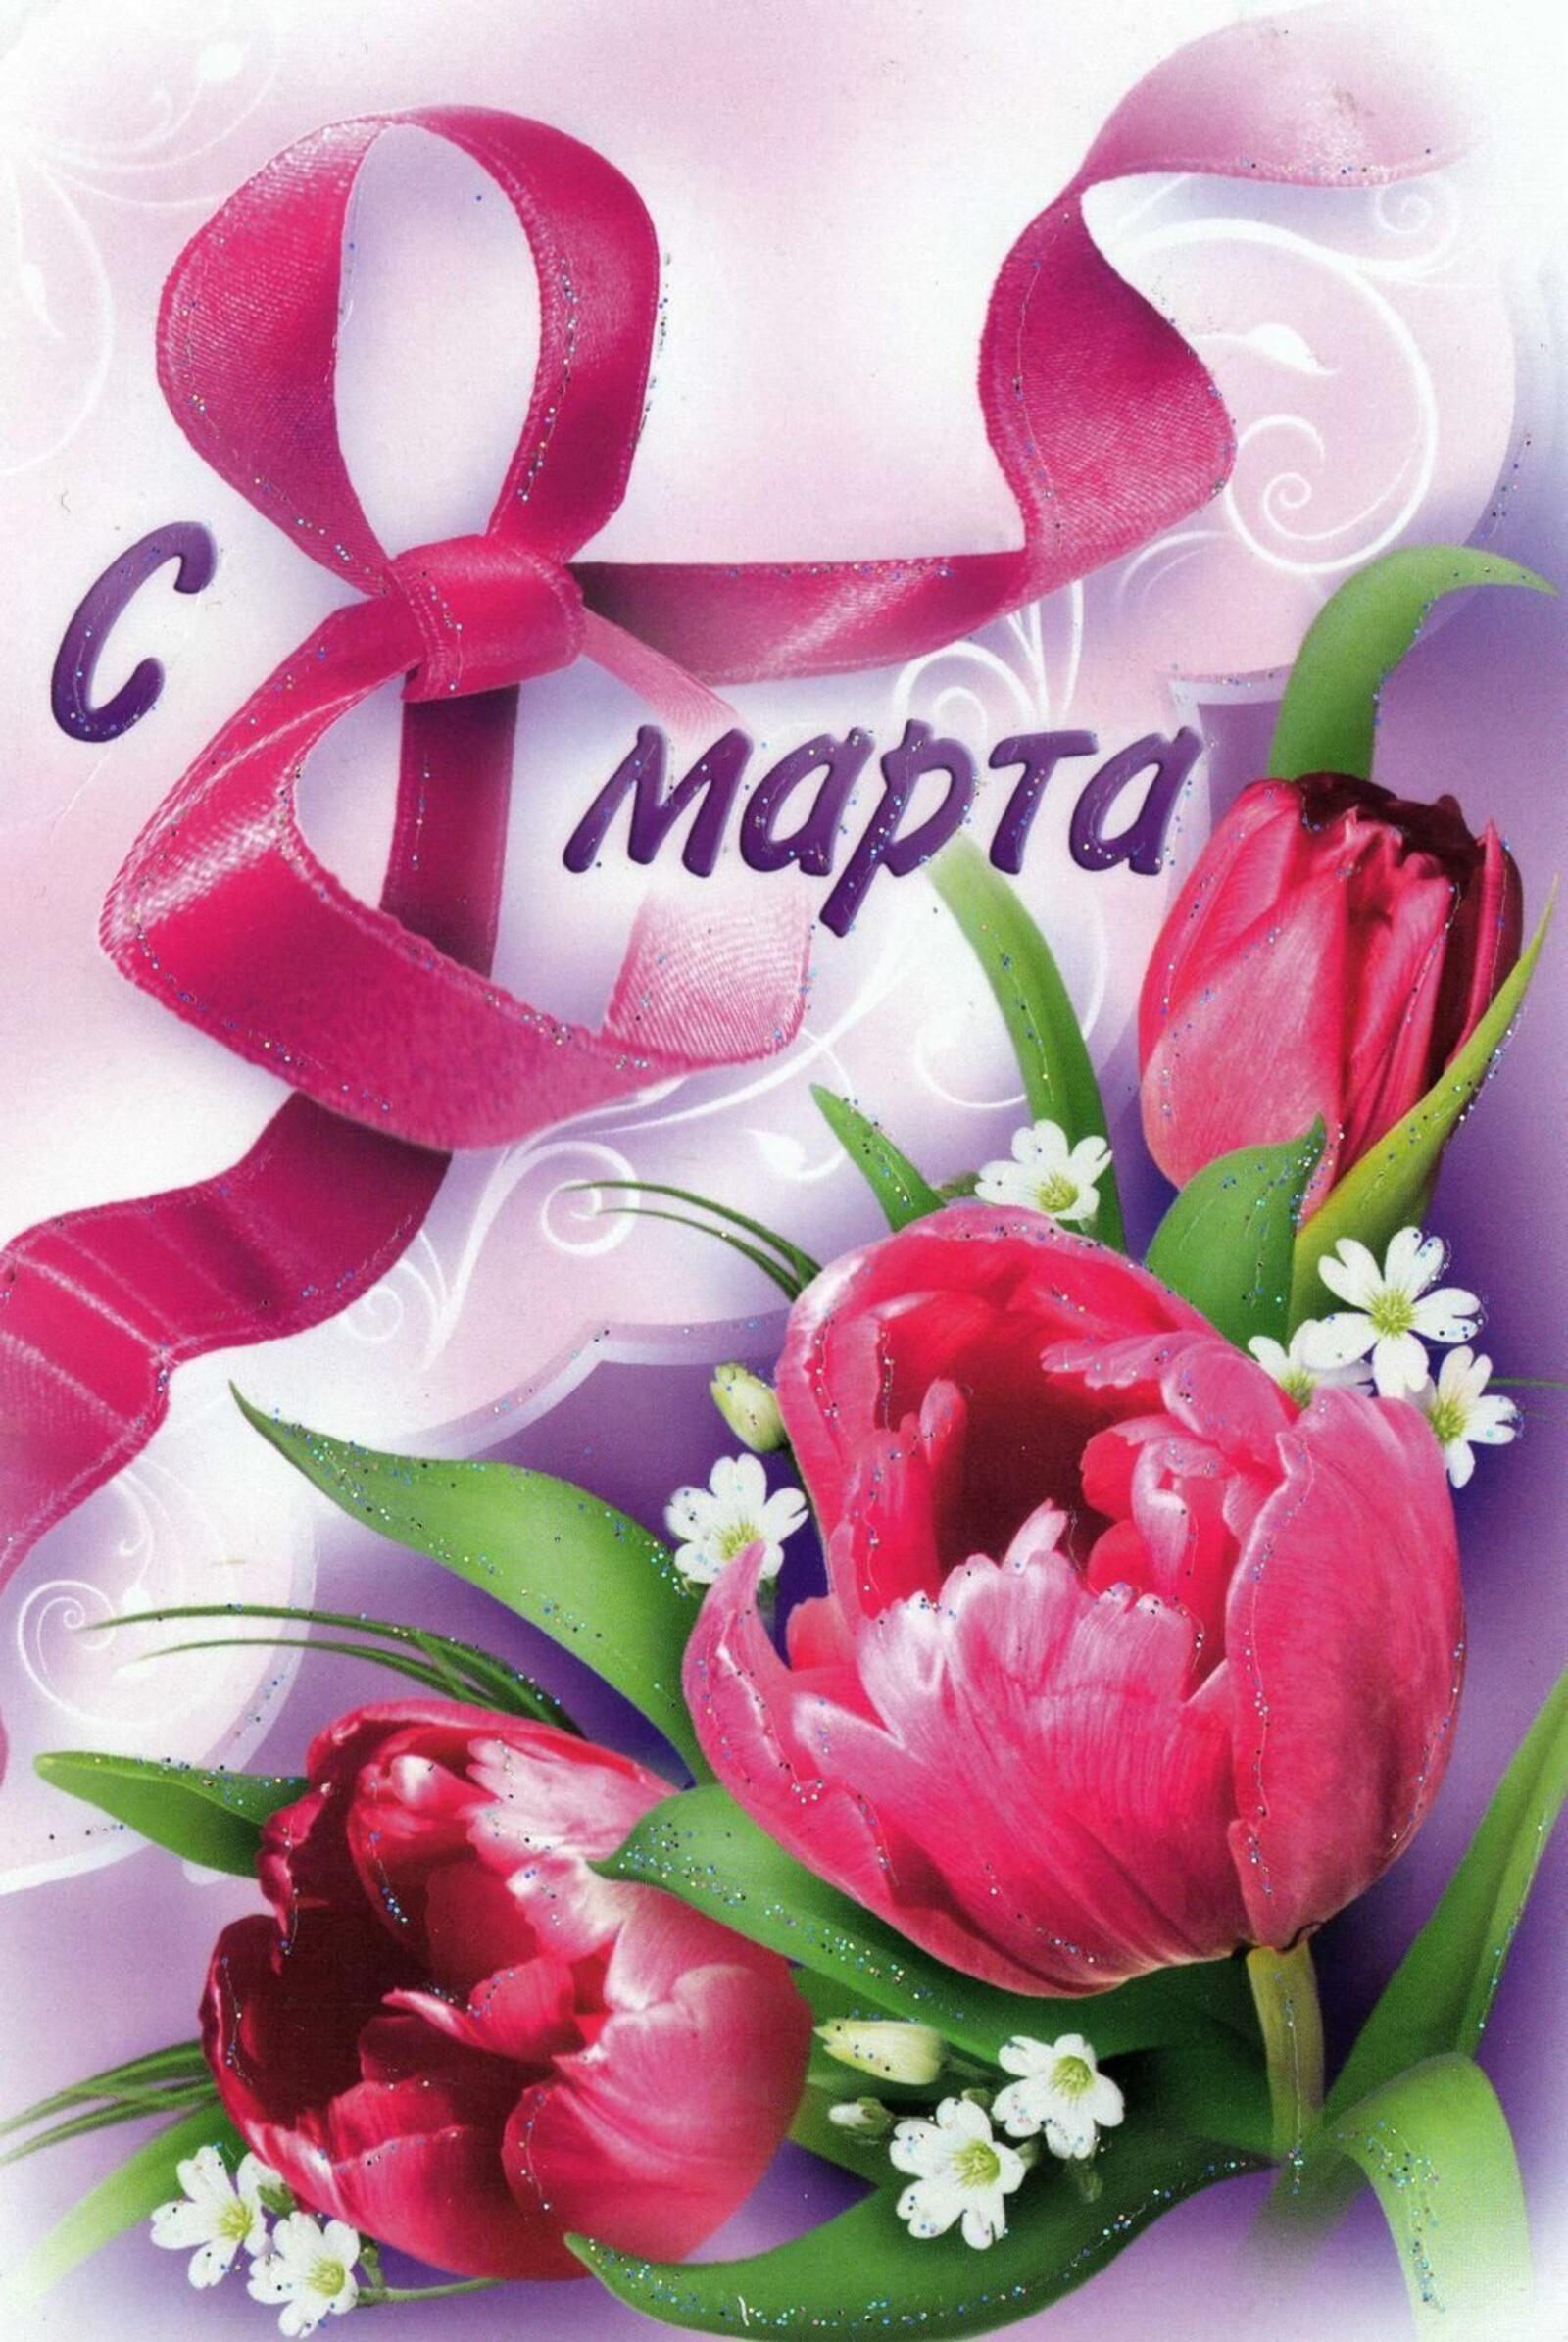 A cool card for a girl on March 8